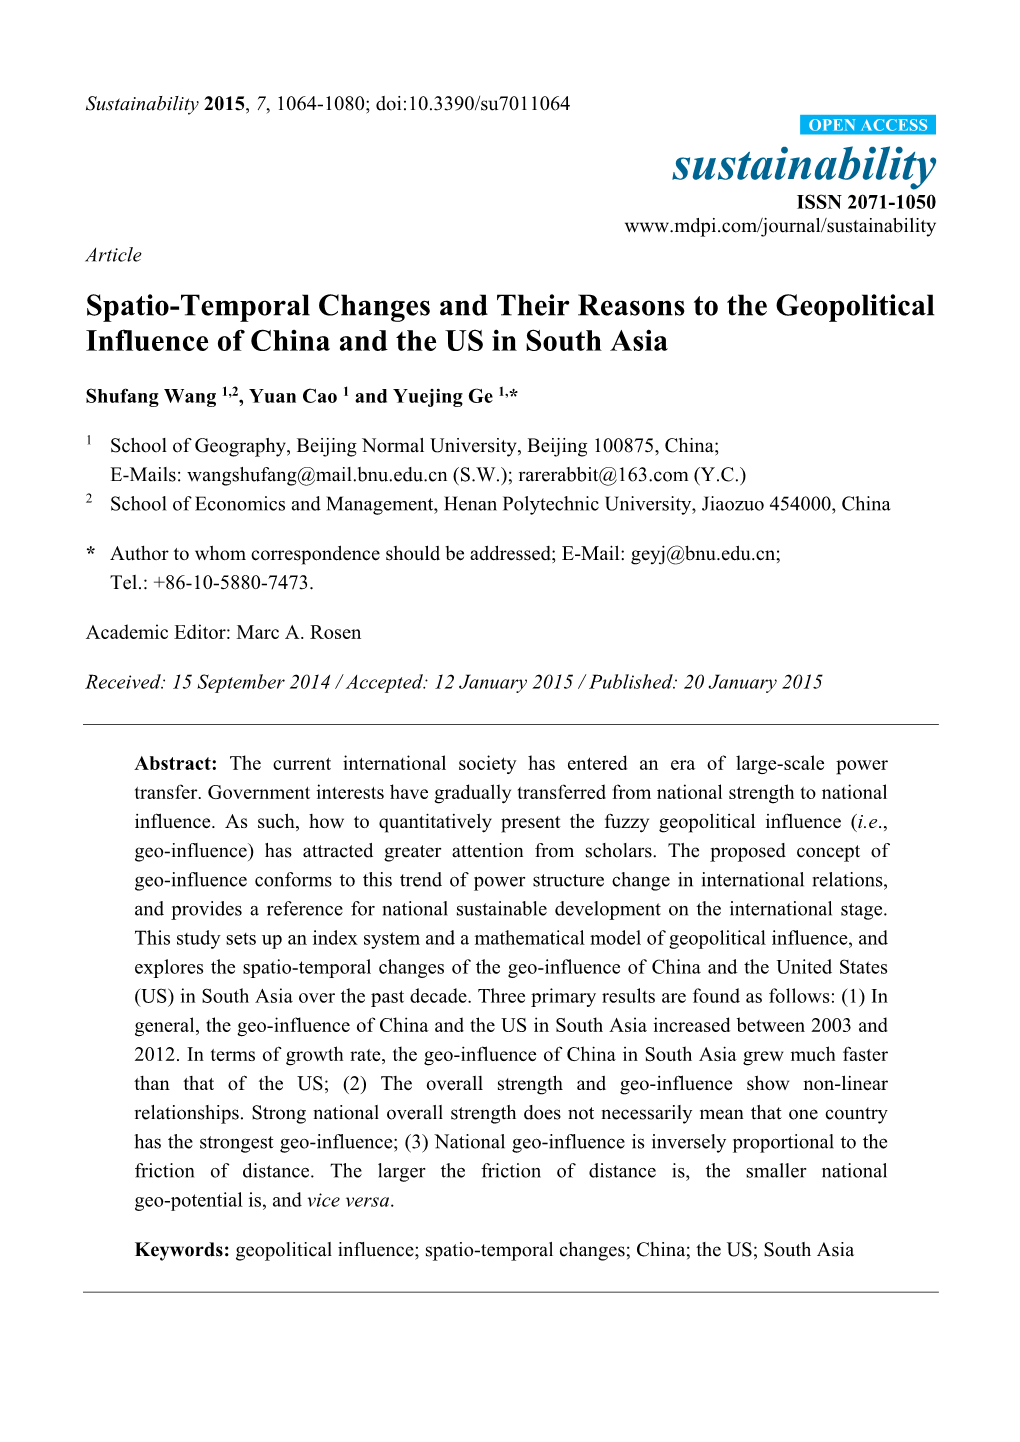 Spatio-Temporal Changes and Their Reasons to the Geopolitical Influence of China and the US in South Asia